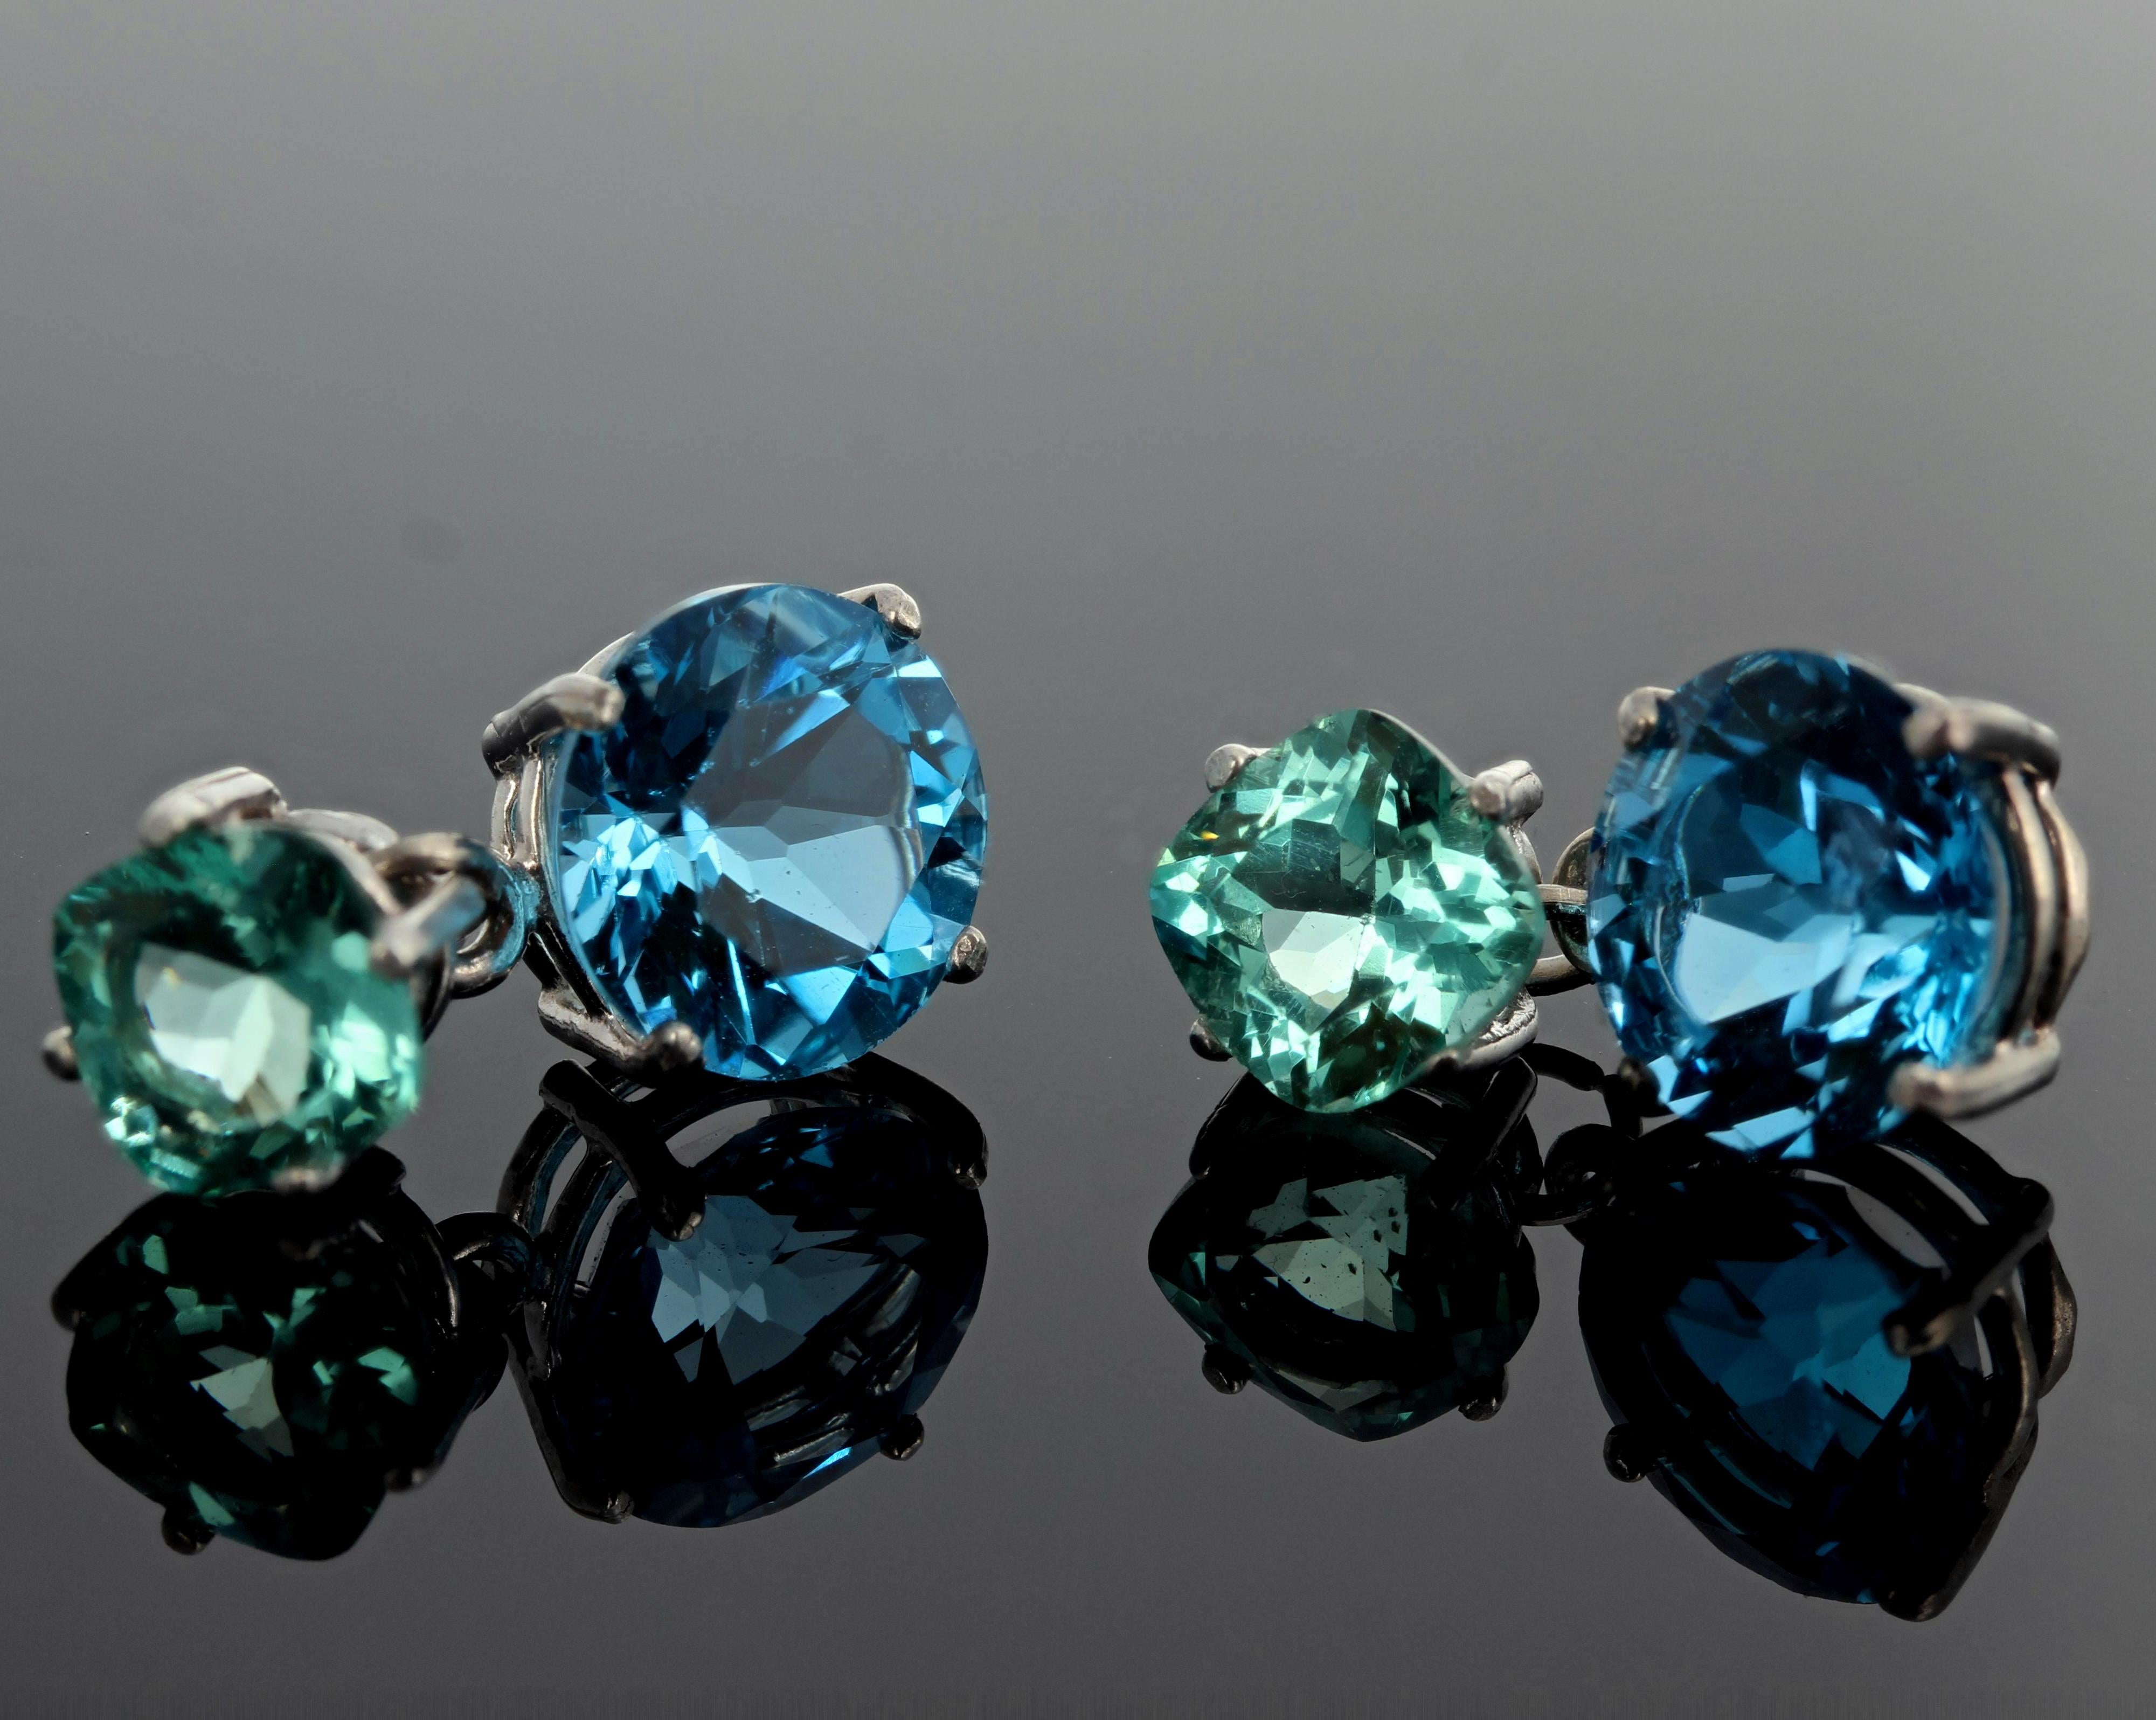 Mixed Cut Gemjunky Glorious 2.58Cts Apatite & 9.6Cts Blue Topaz Silver Stud Earrings